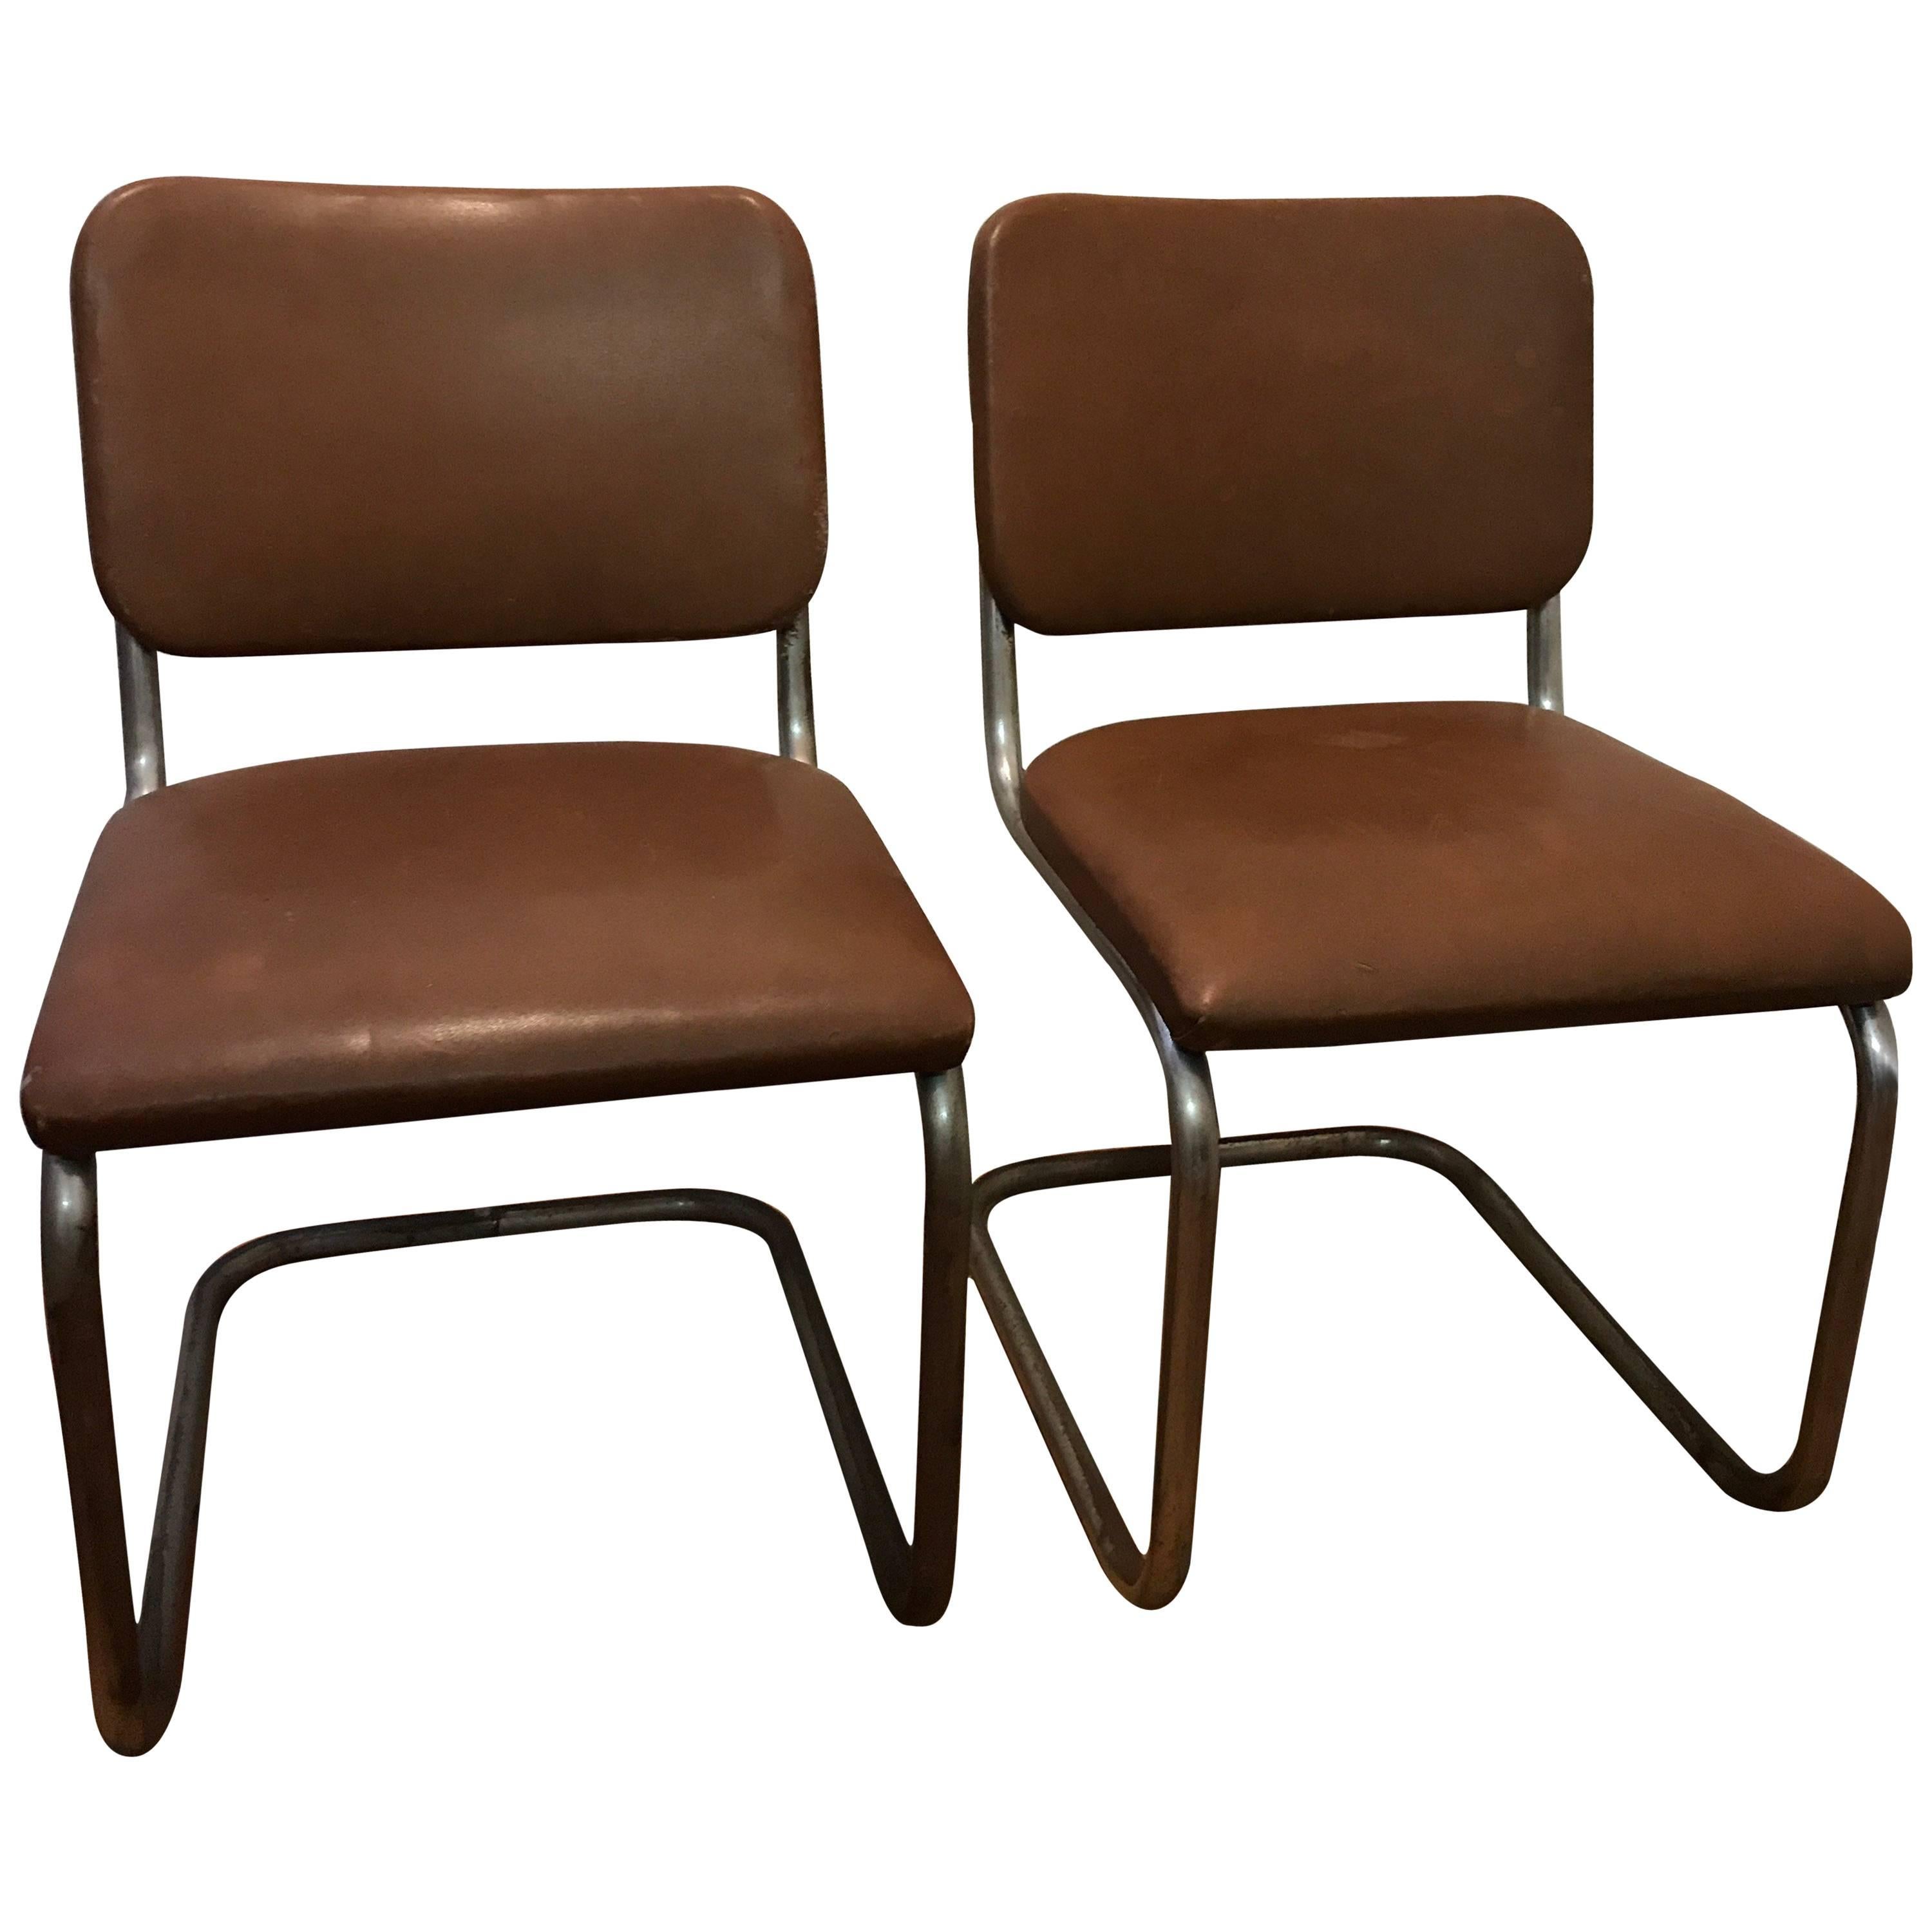 Pair of Thonet Chairs circa 1935-1950 Model B32 Simili Signed Collectors Items For Sale